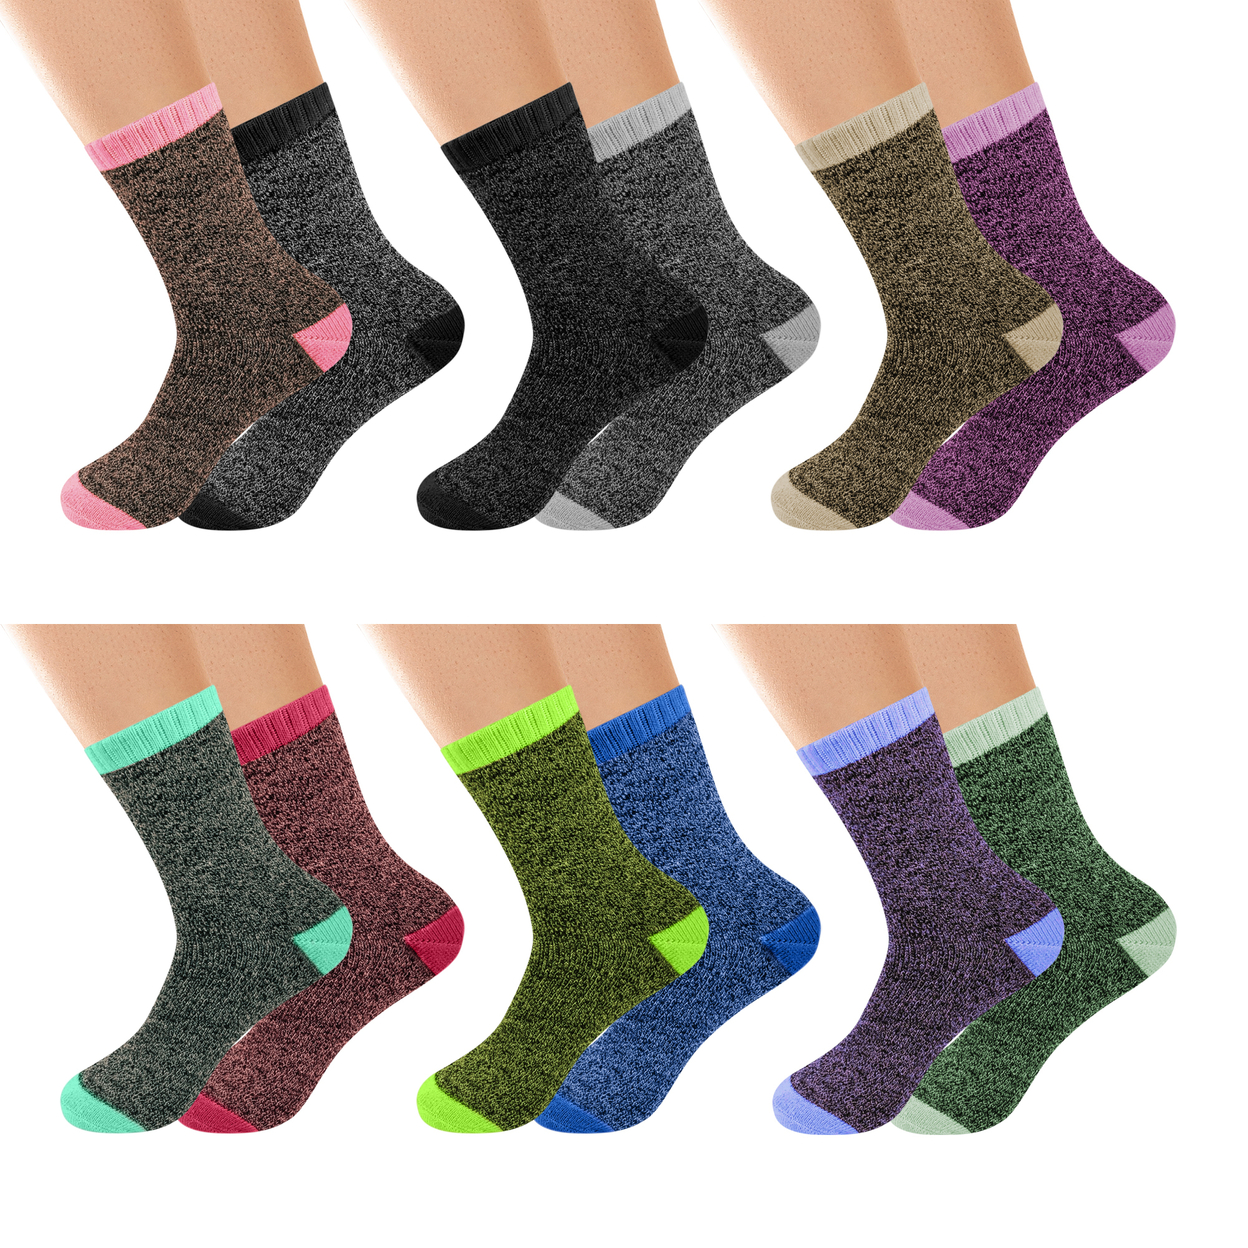 3-Pairs: Women's Winter Warm Thick Soft Cozy Thermal Boot Socks